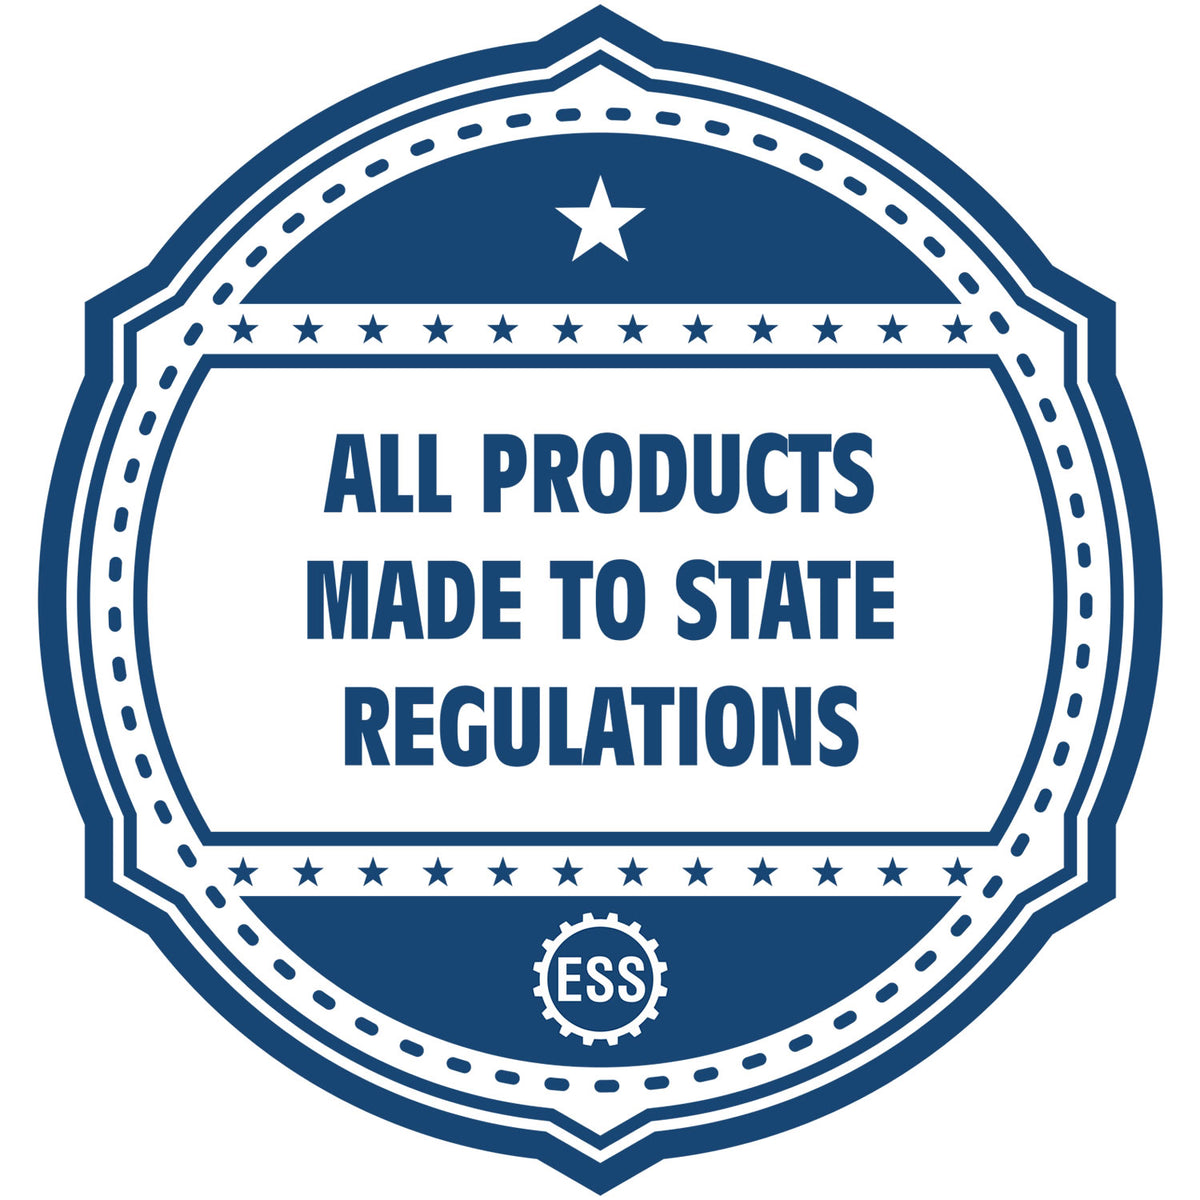 An icon or badge element for the Soft Montana Professional Engineer Seal showing that this product is made in compliance with state regulations.